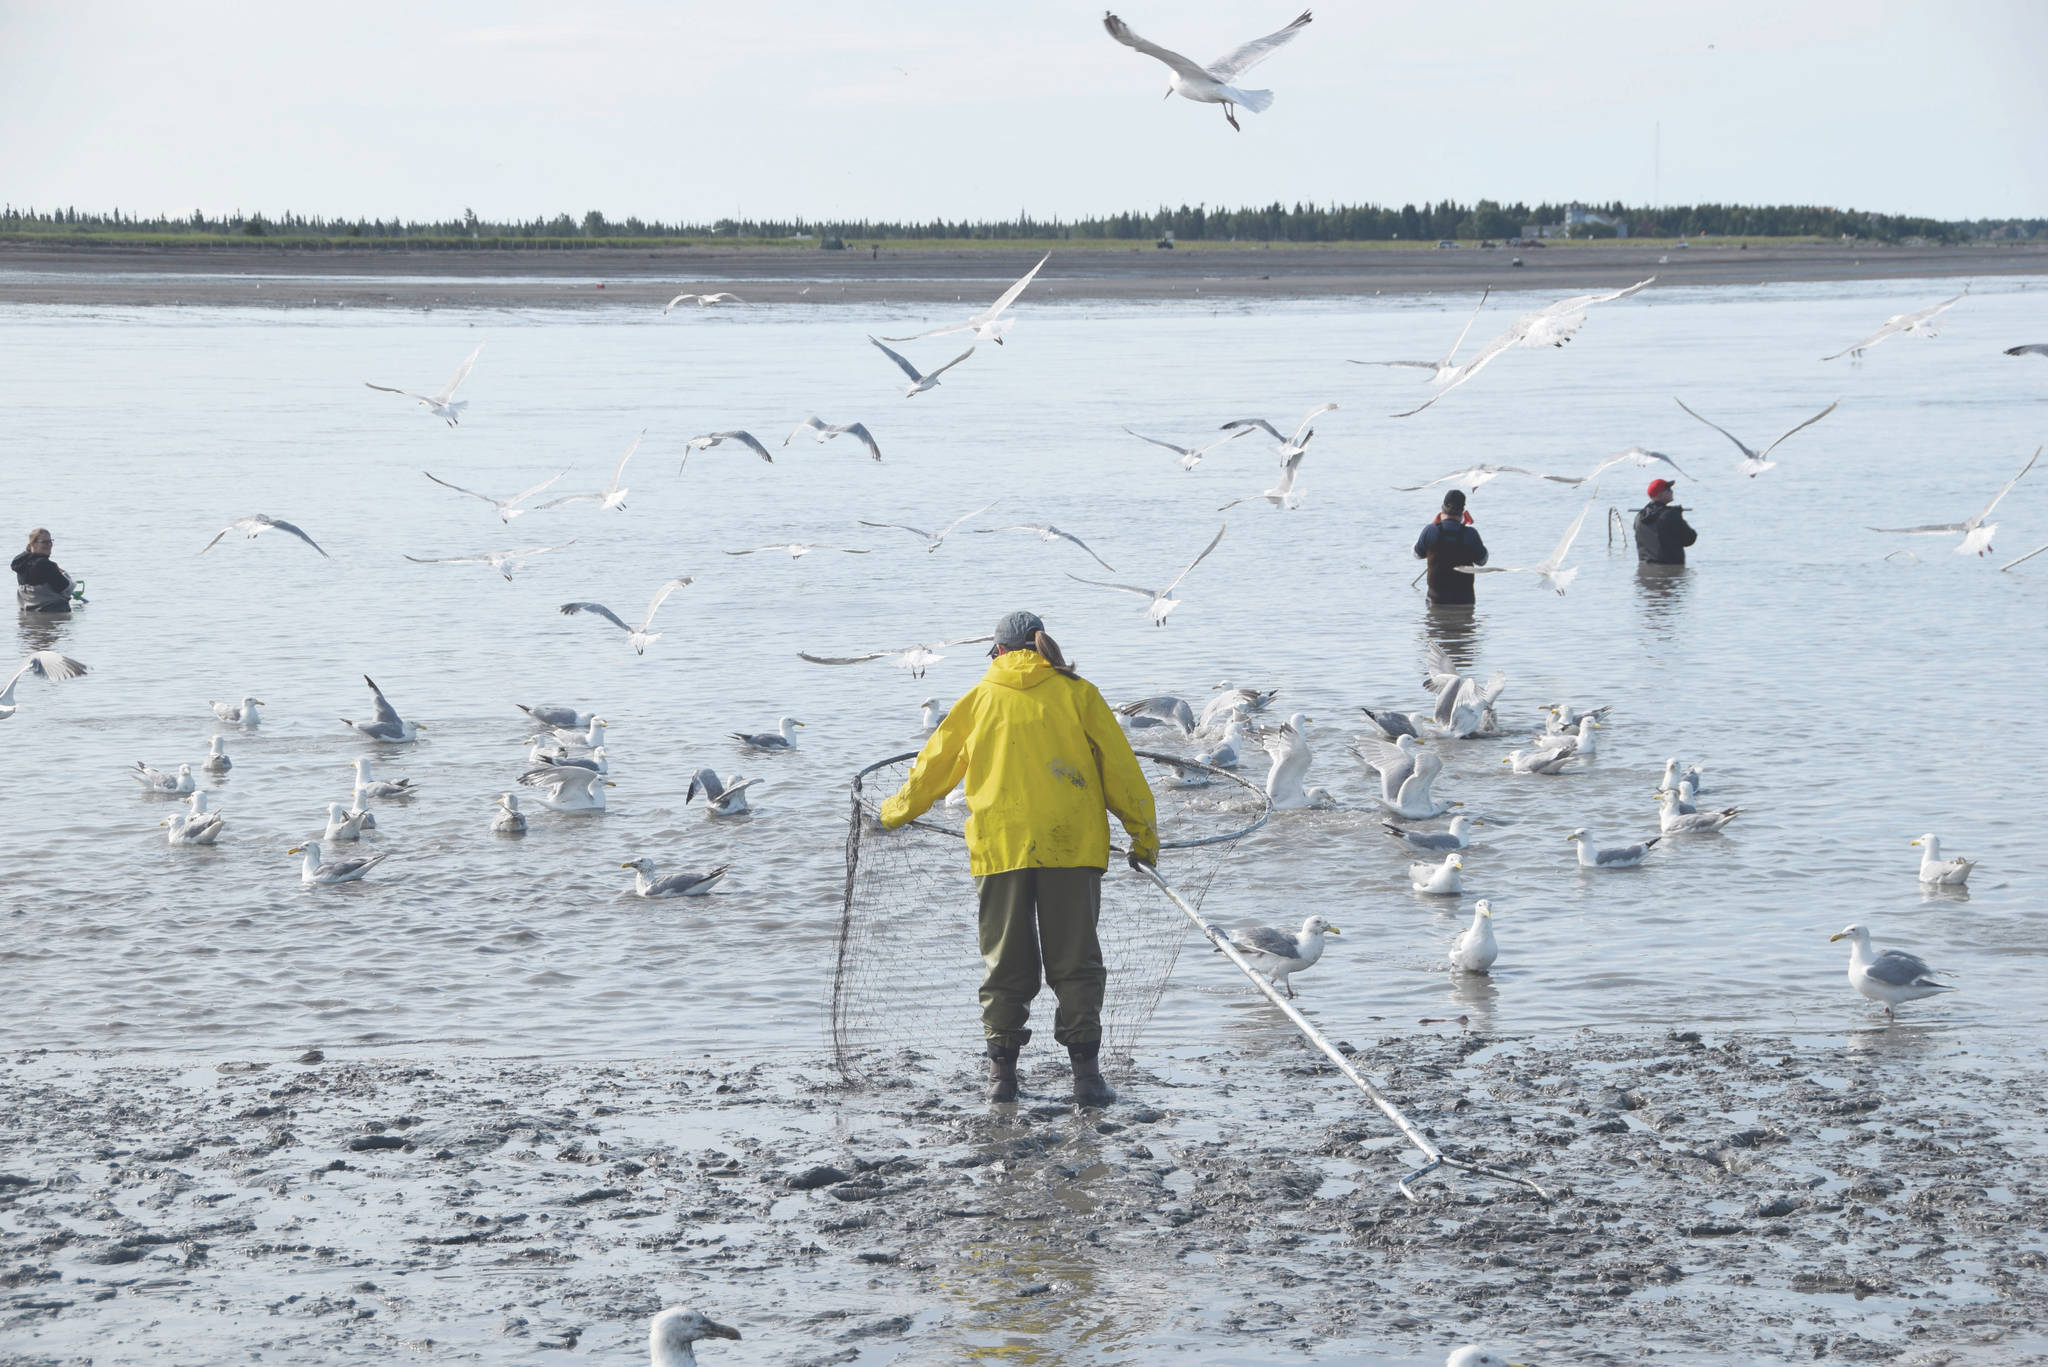 Board of Fisheries opens Susitna River to dip netting